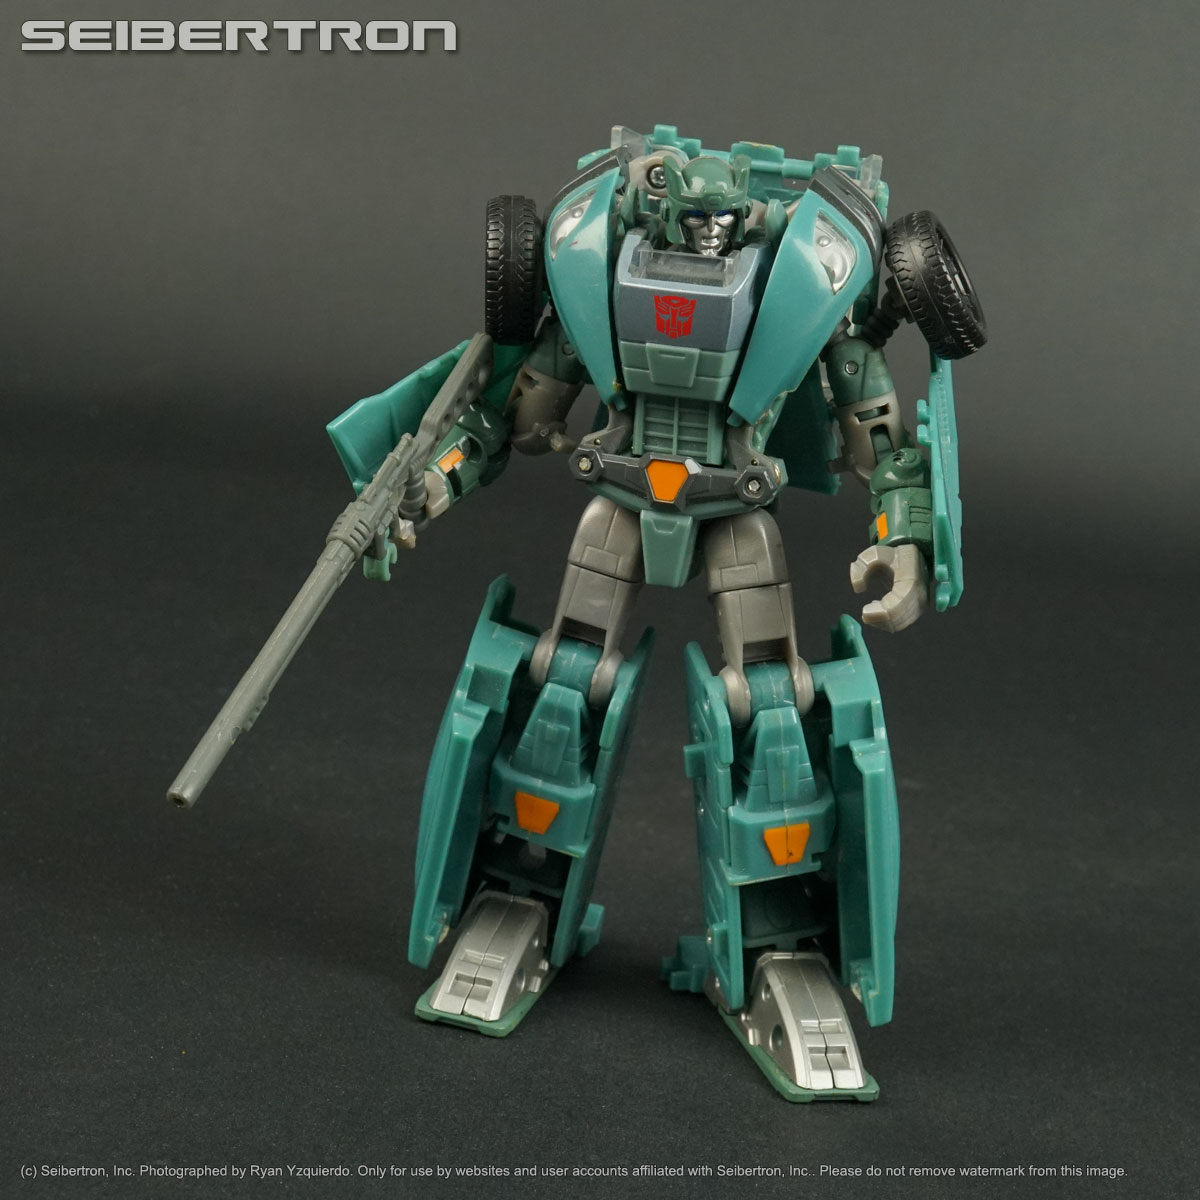 SERGEANT KUP Transformers Generations Deluxe complete Hasbro 2010 230920A